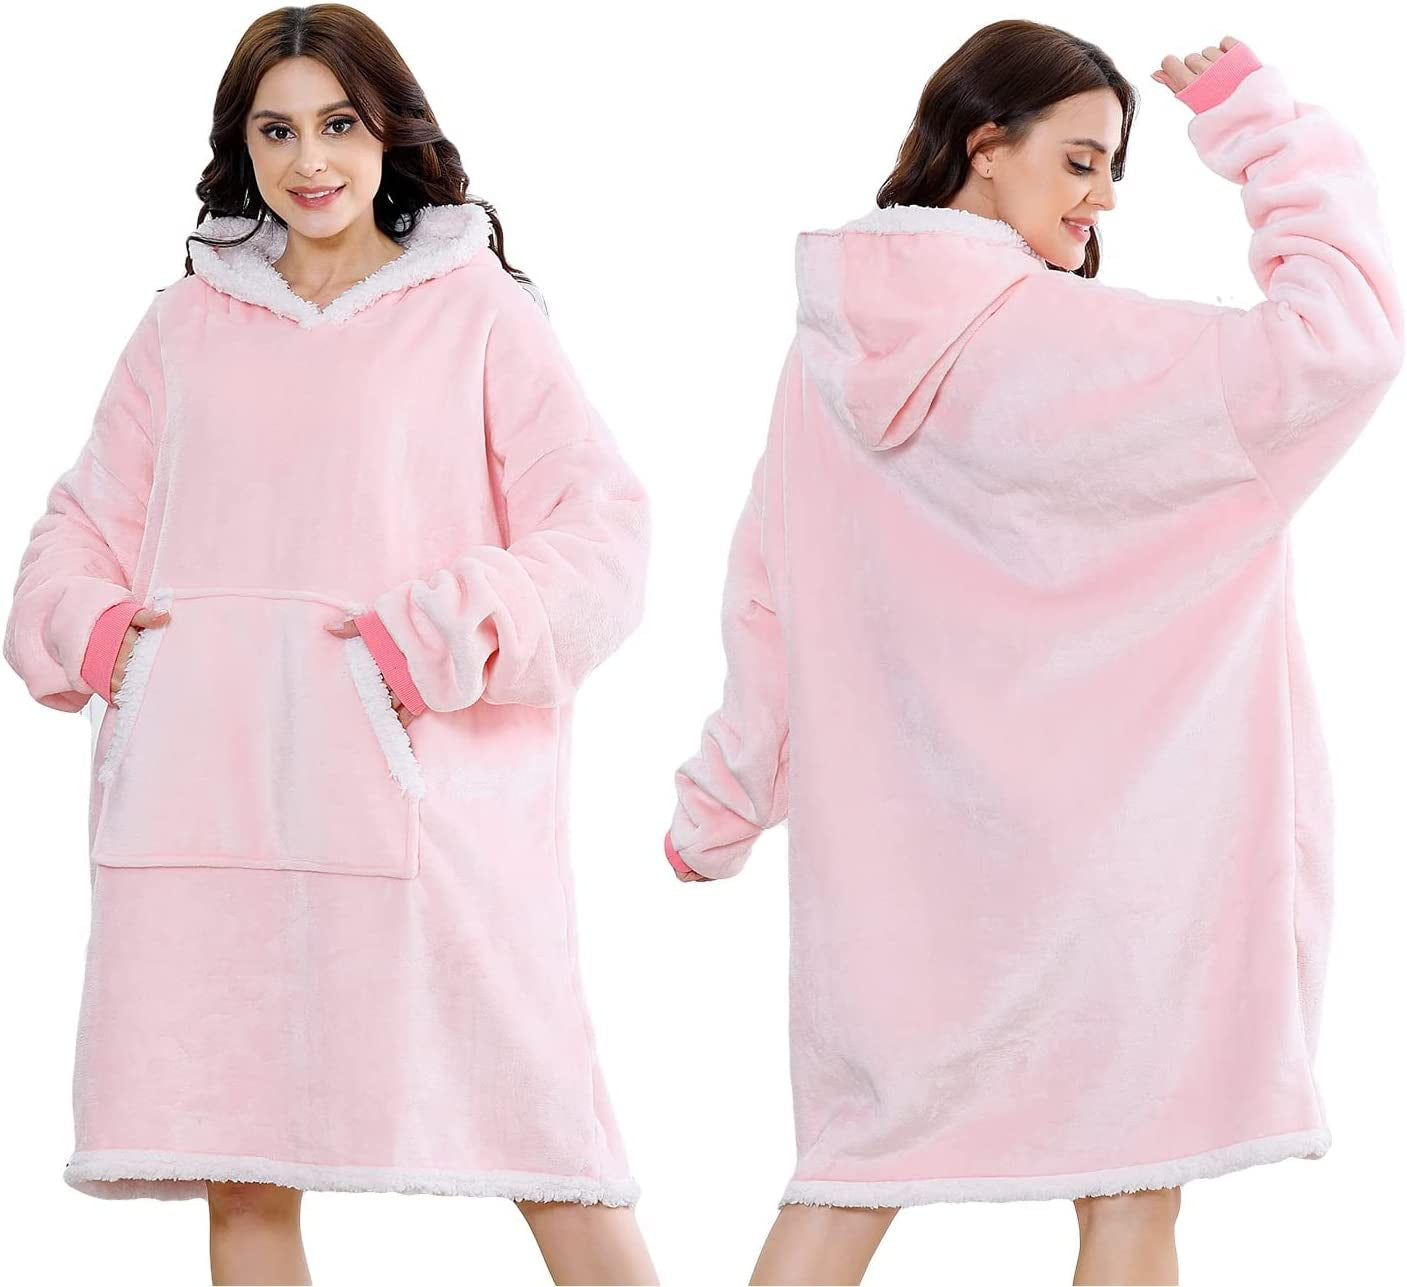 Wearable Blanket Oversized Sweatshirt for Women and Men, Super Soft Warm and Sweatshirt with Hood Pocket and Sleeves Plush Hoodie Blanket, One Size Fits All